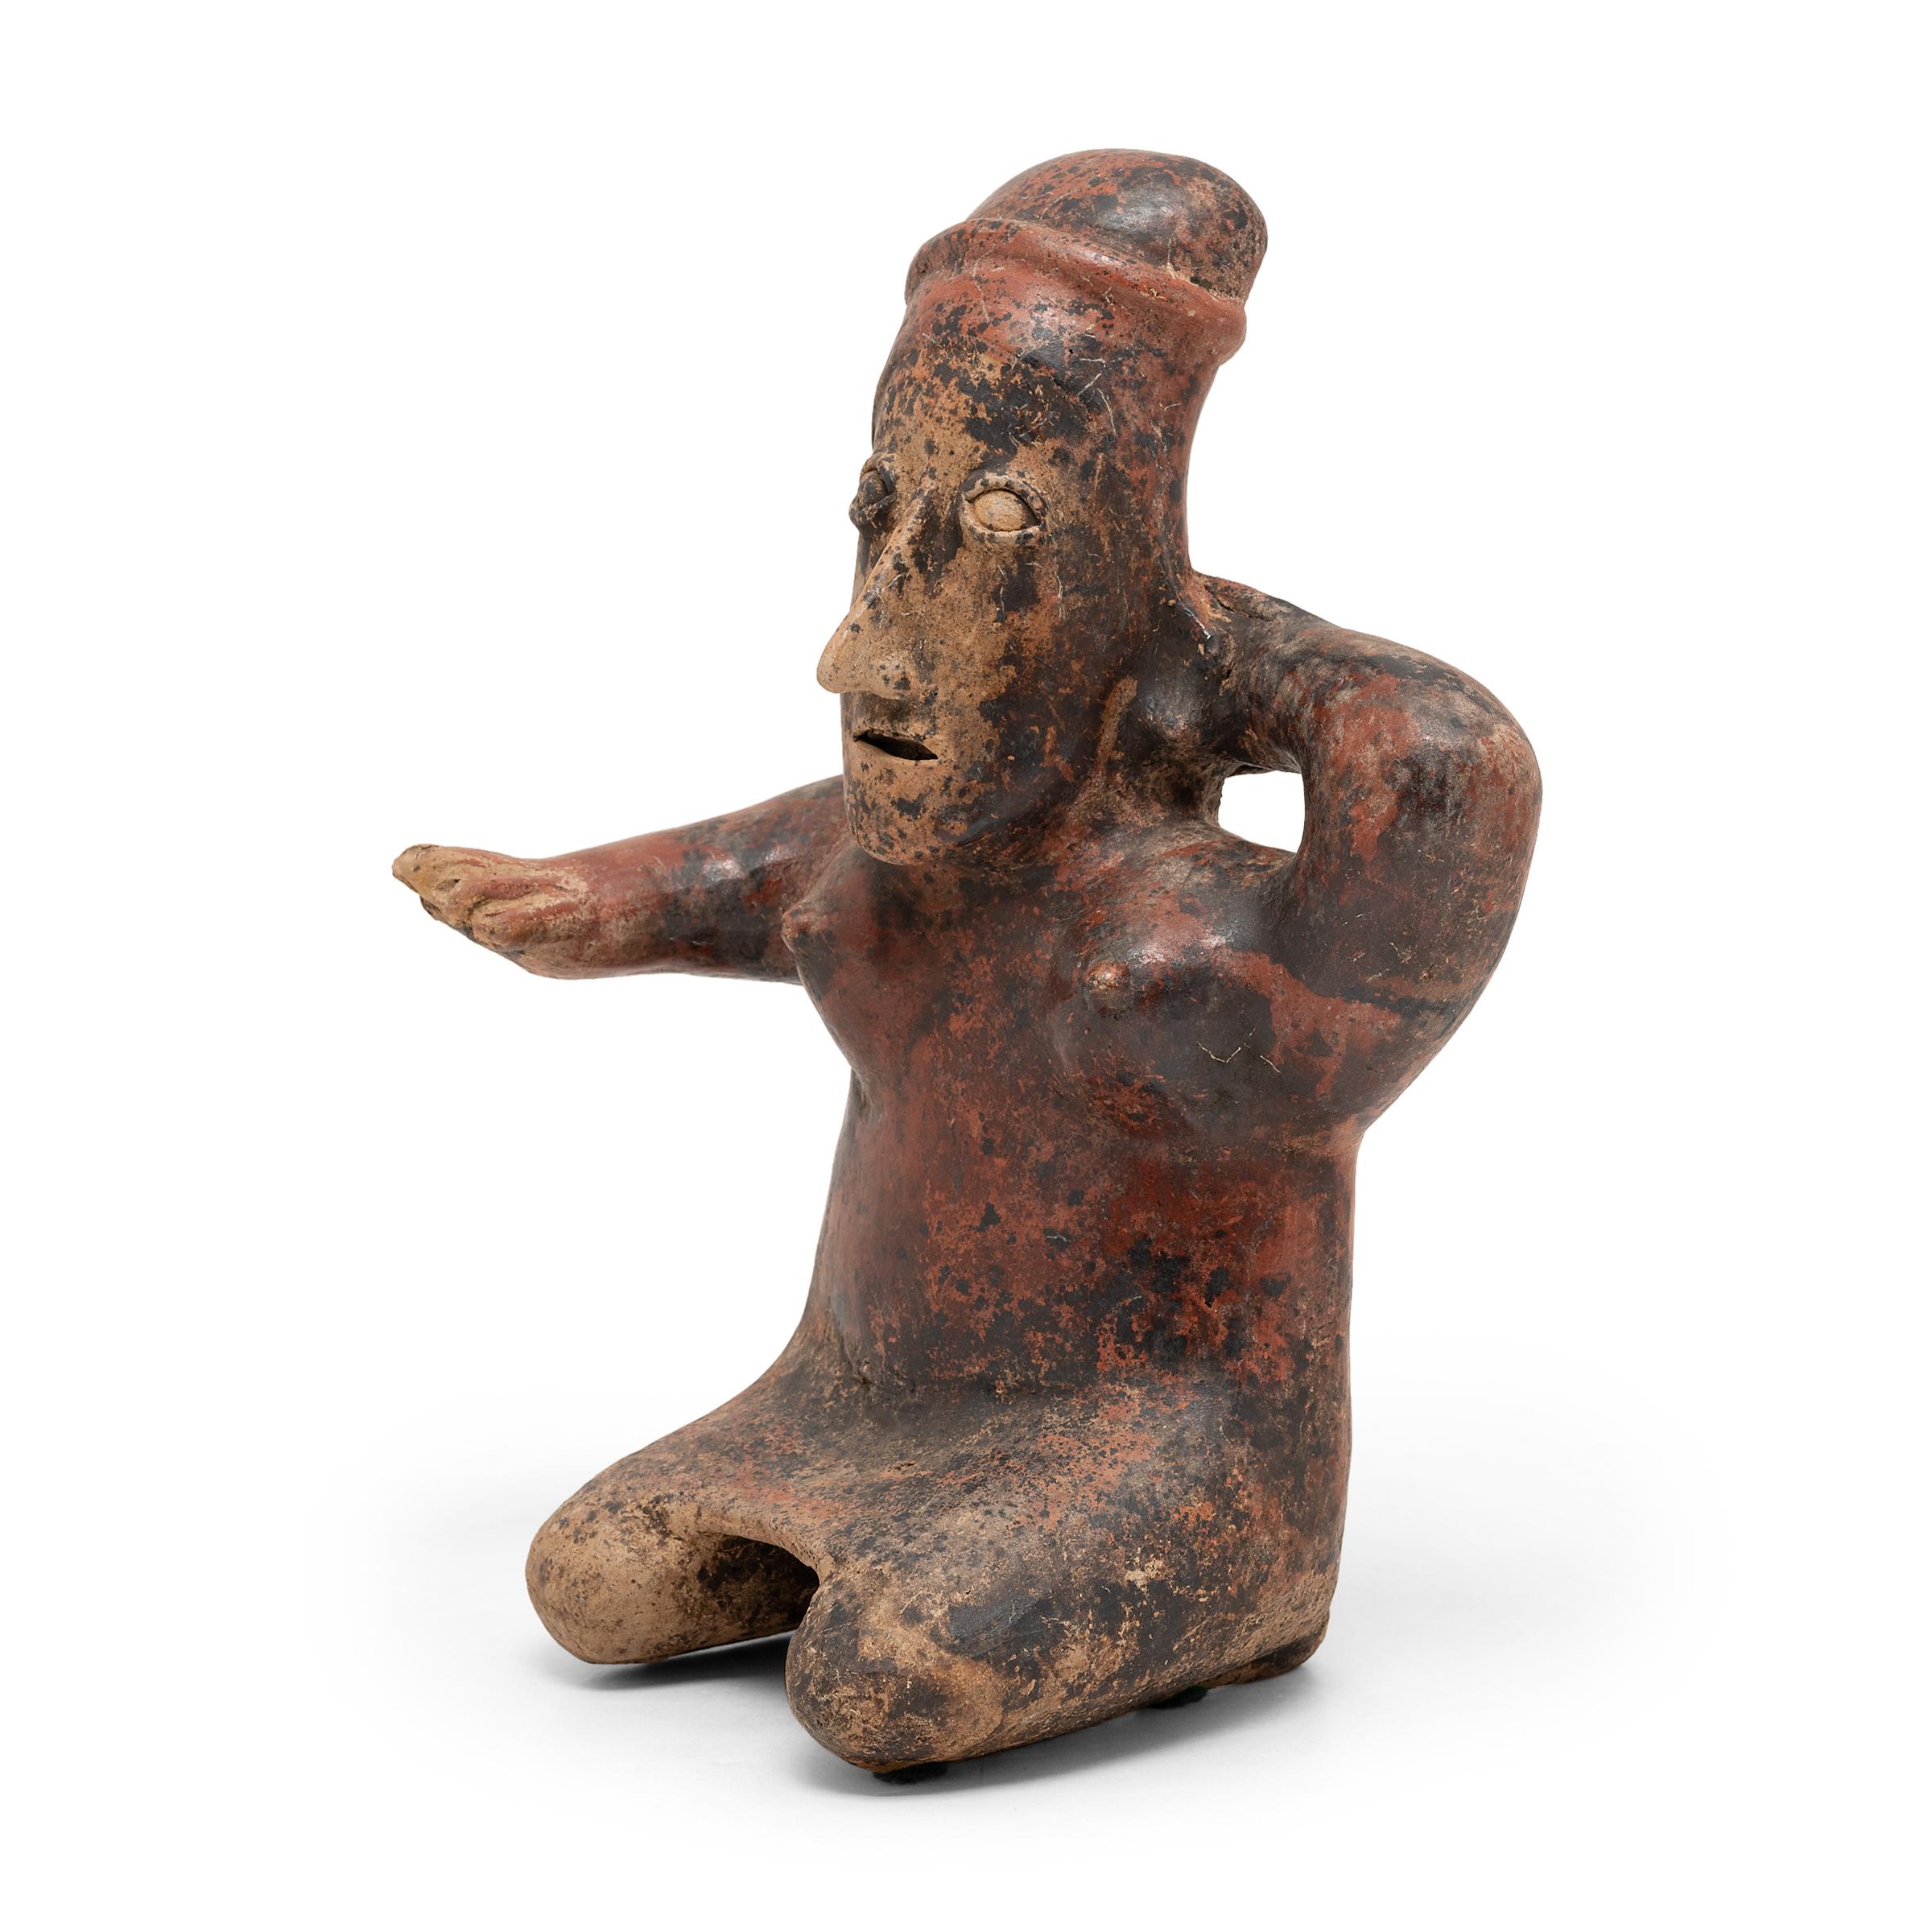 This commanding earthenware figure is attributed to the Jalisco region of Western Mexico and dates to ca. 400 AD. Possibly depicting an ancestor, warrior, or mythical person, the figure was likely one of a group of figures placed within a tomb to